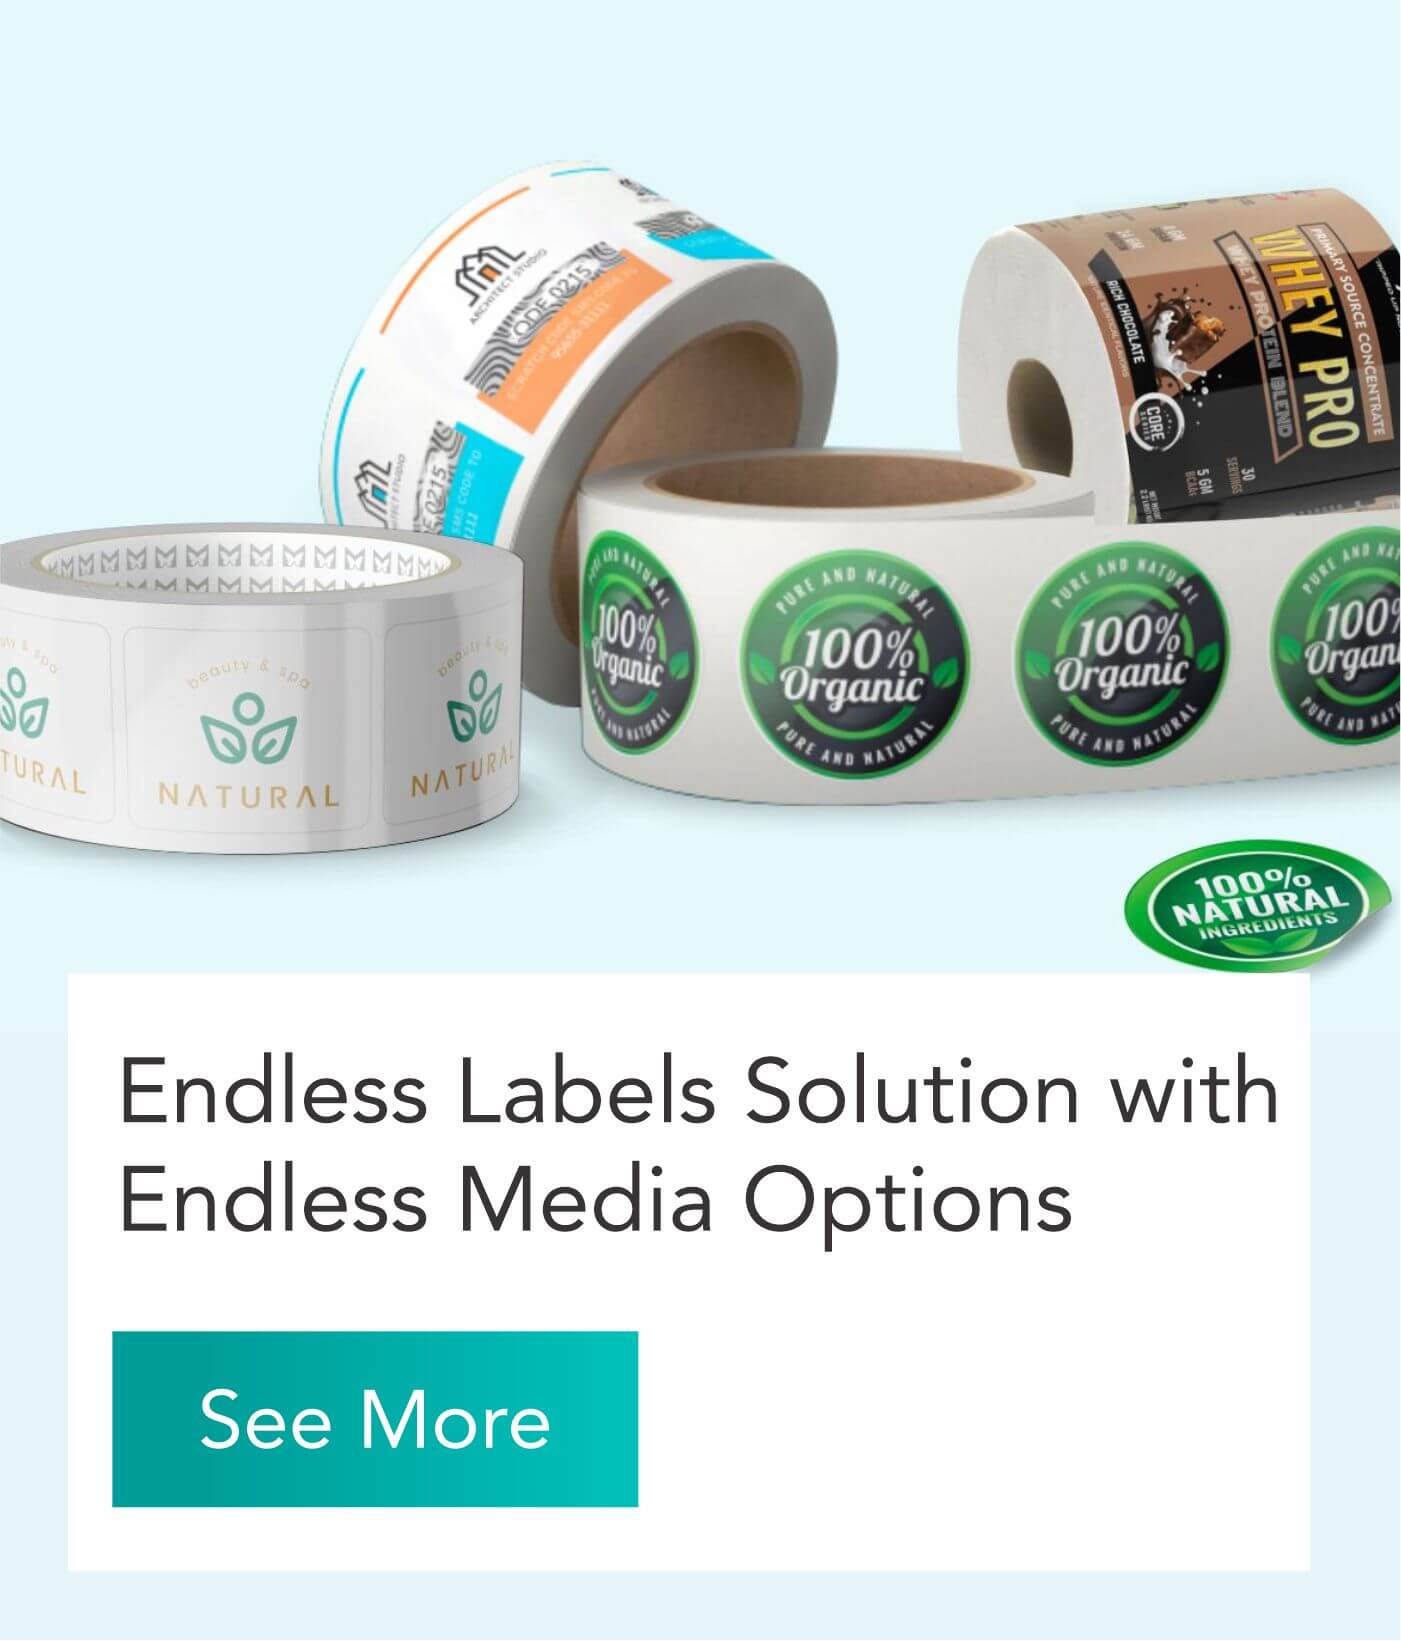 Endless Labels Solution with Endless Media Options